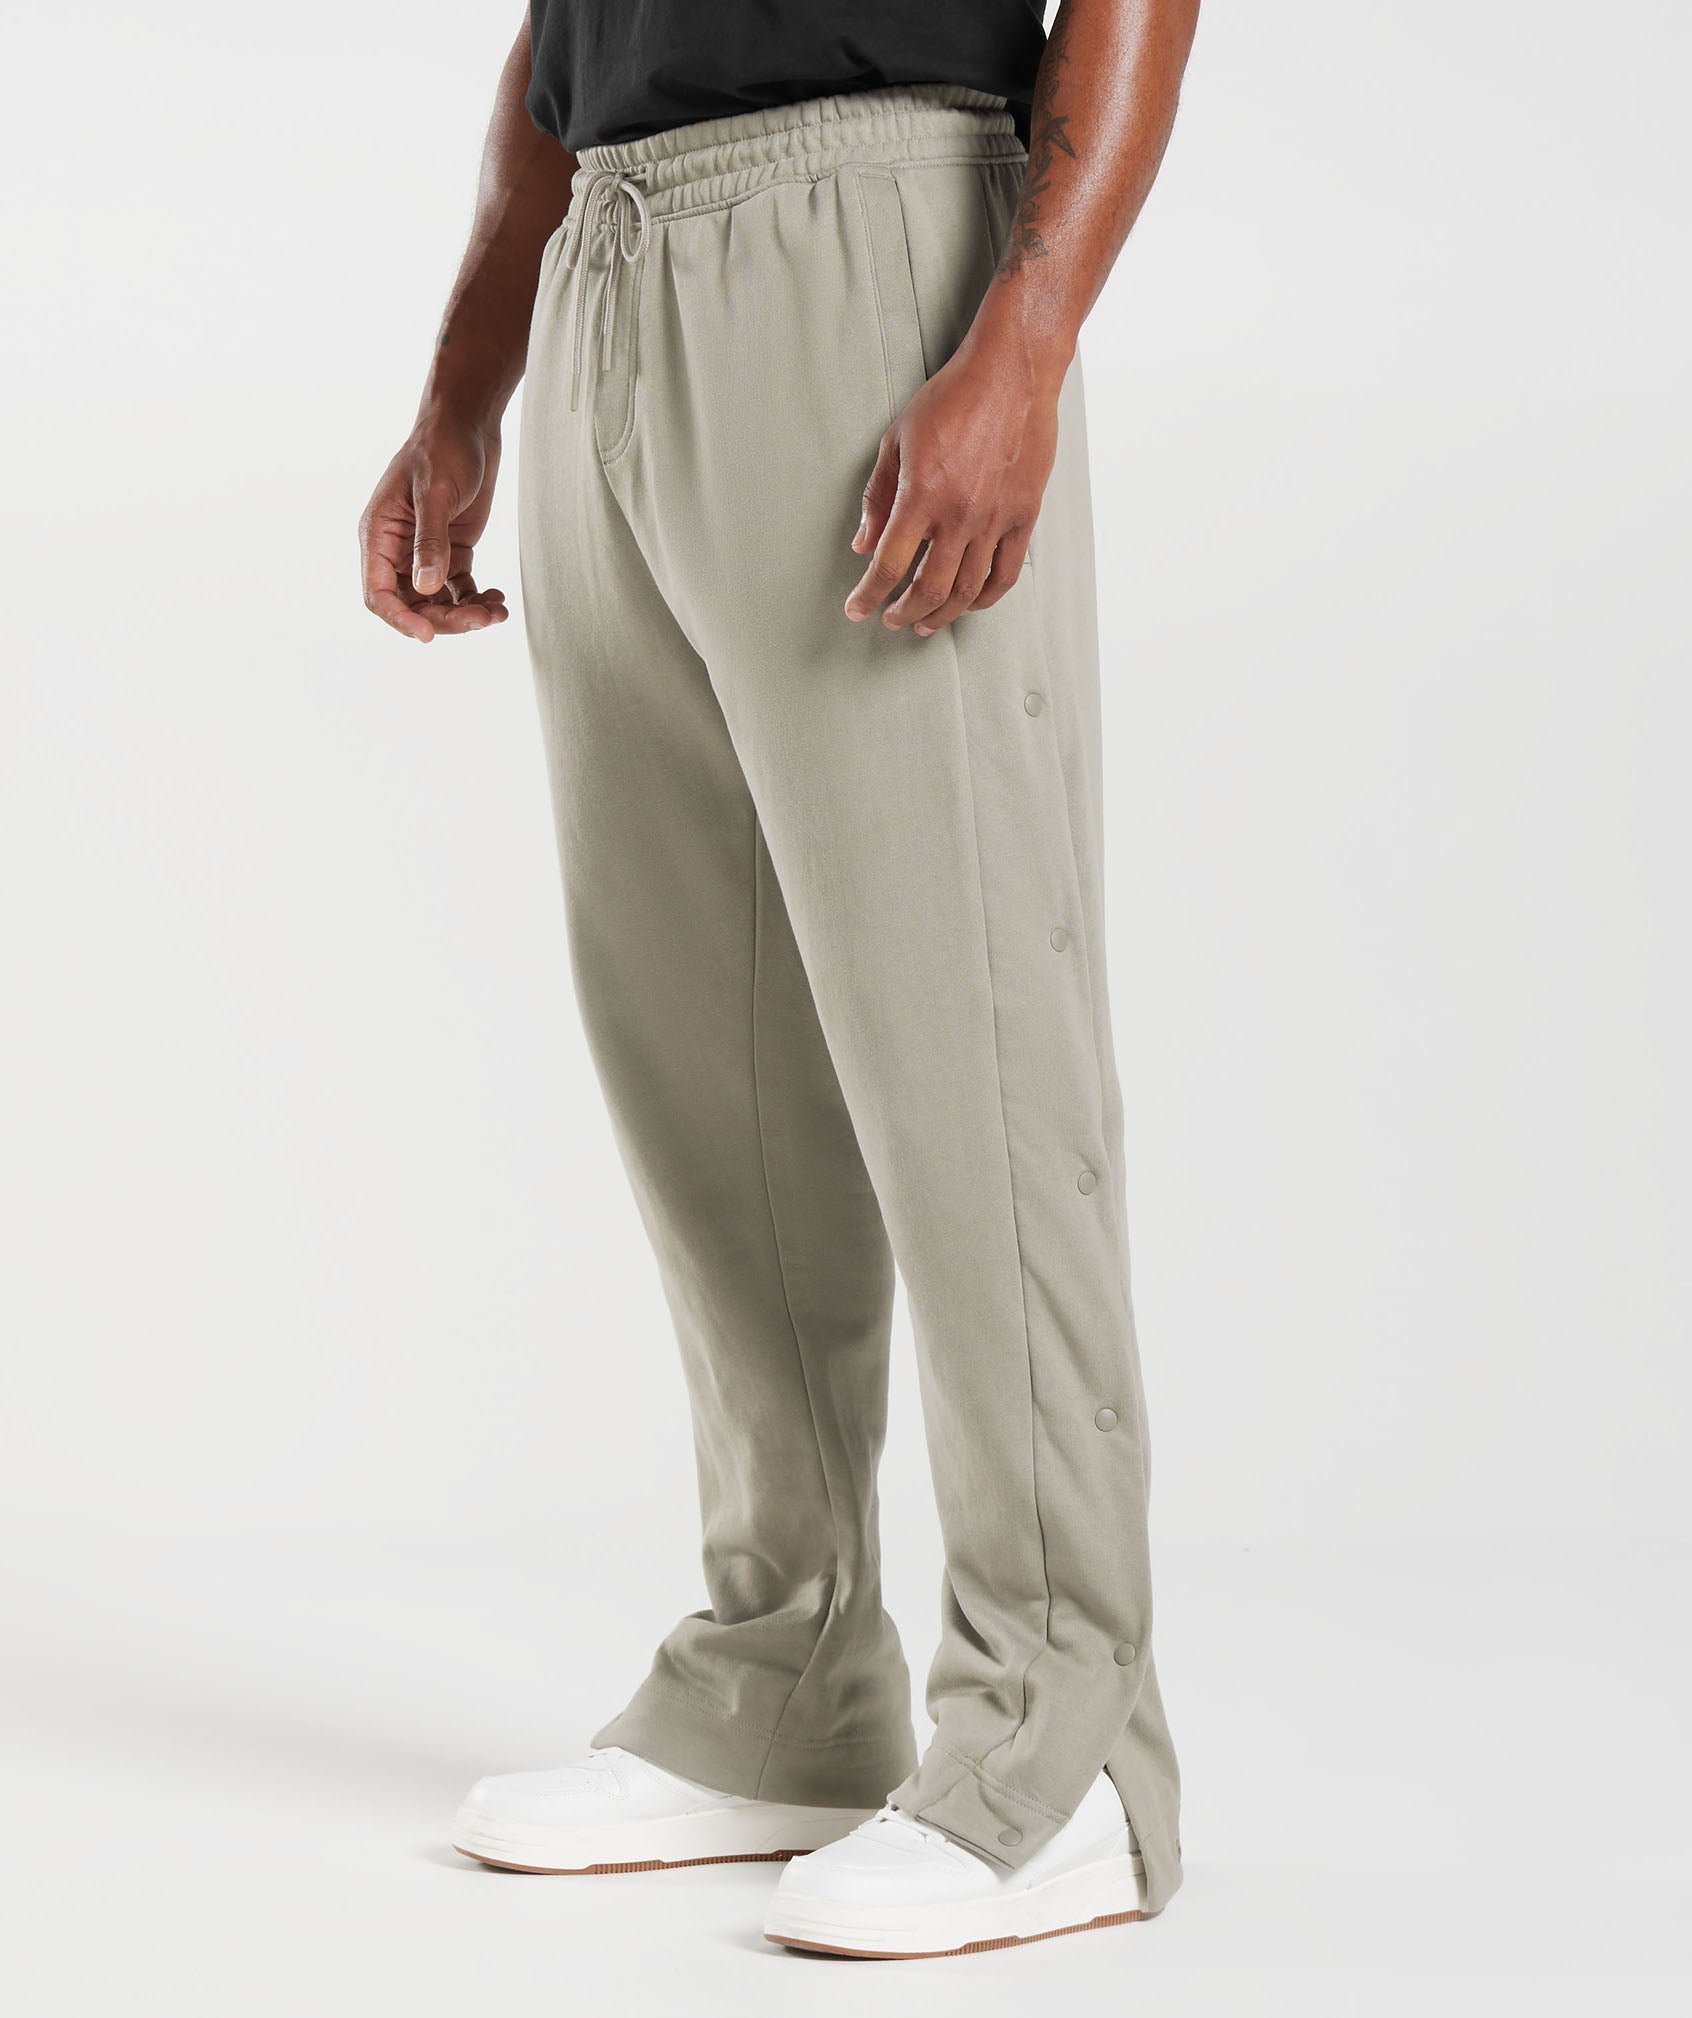 Rest Day Essentials Sweat Snap Joggers in  Ecru Brown - view 3